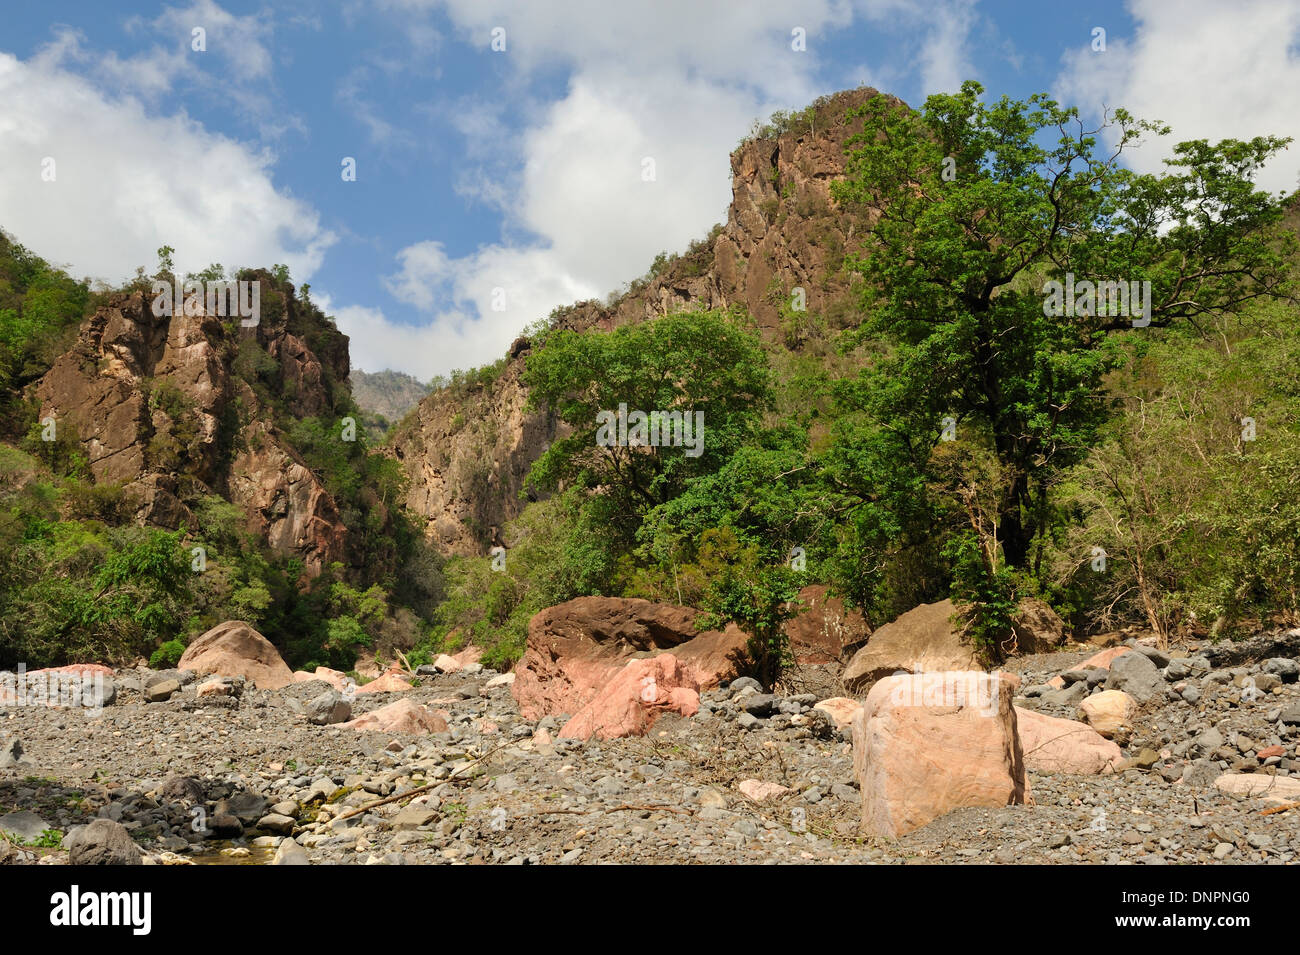 Small canyon the Day forest in Djibouti, Horn of Africa Stock Photo